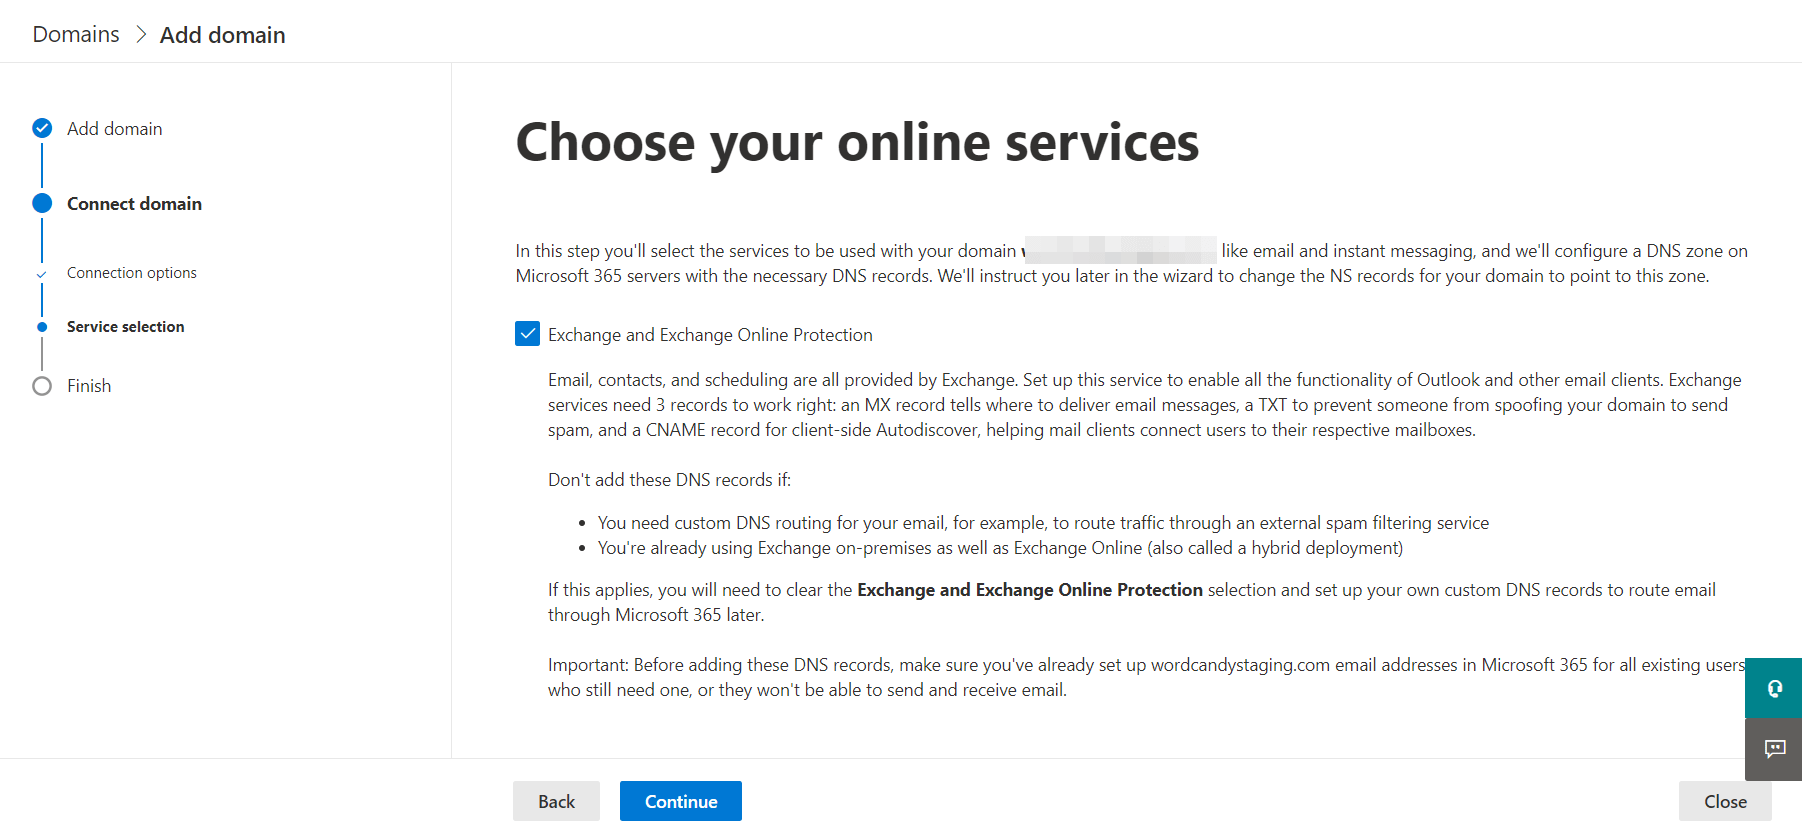 Choosing the online services for the Microsoft account